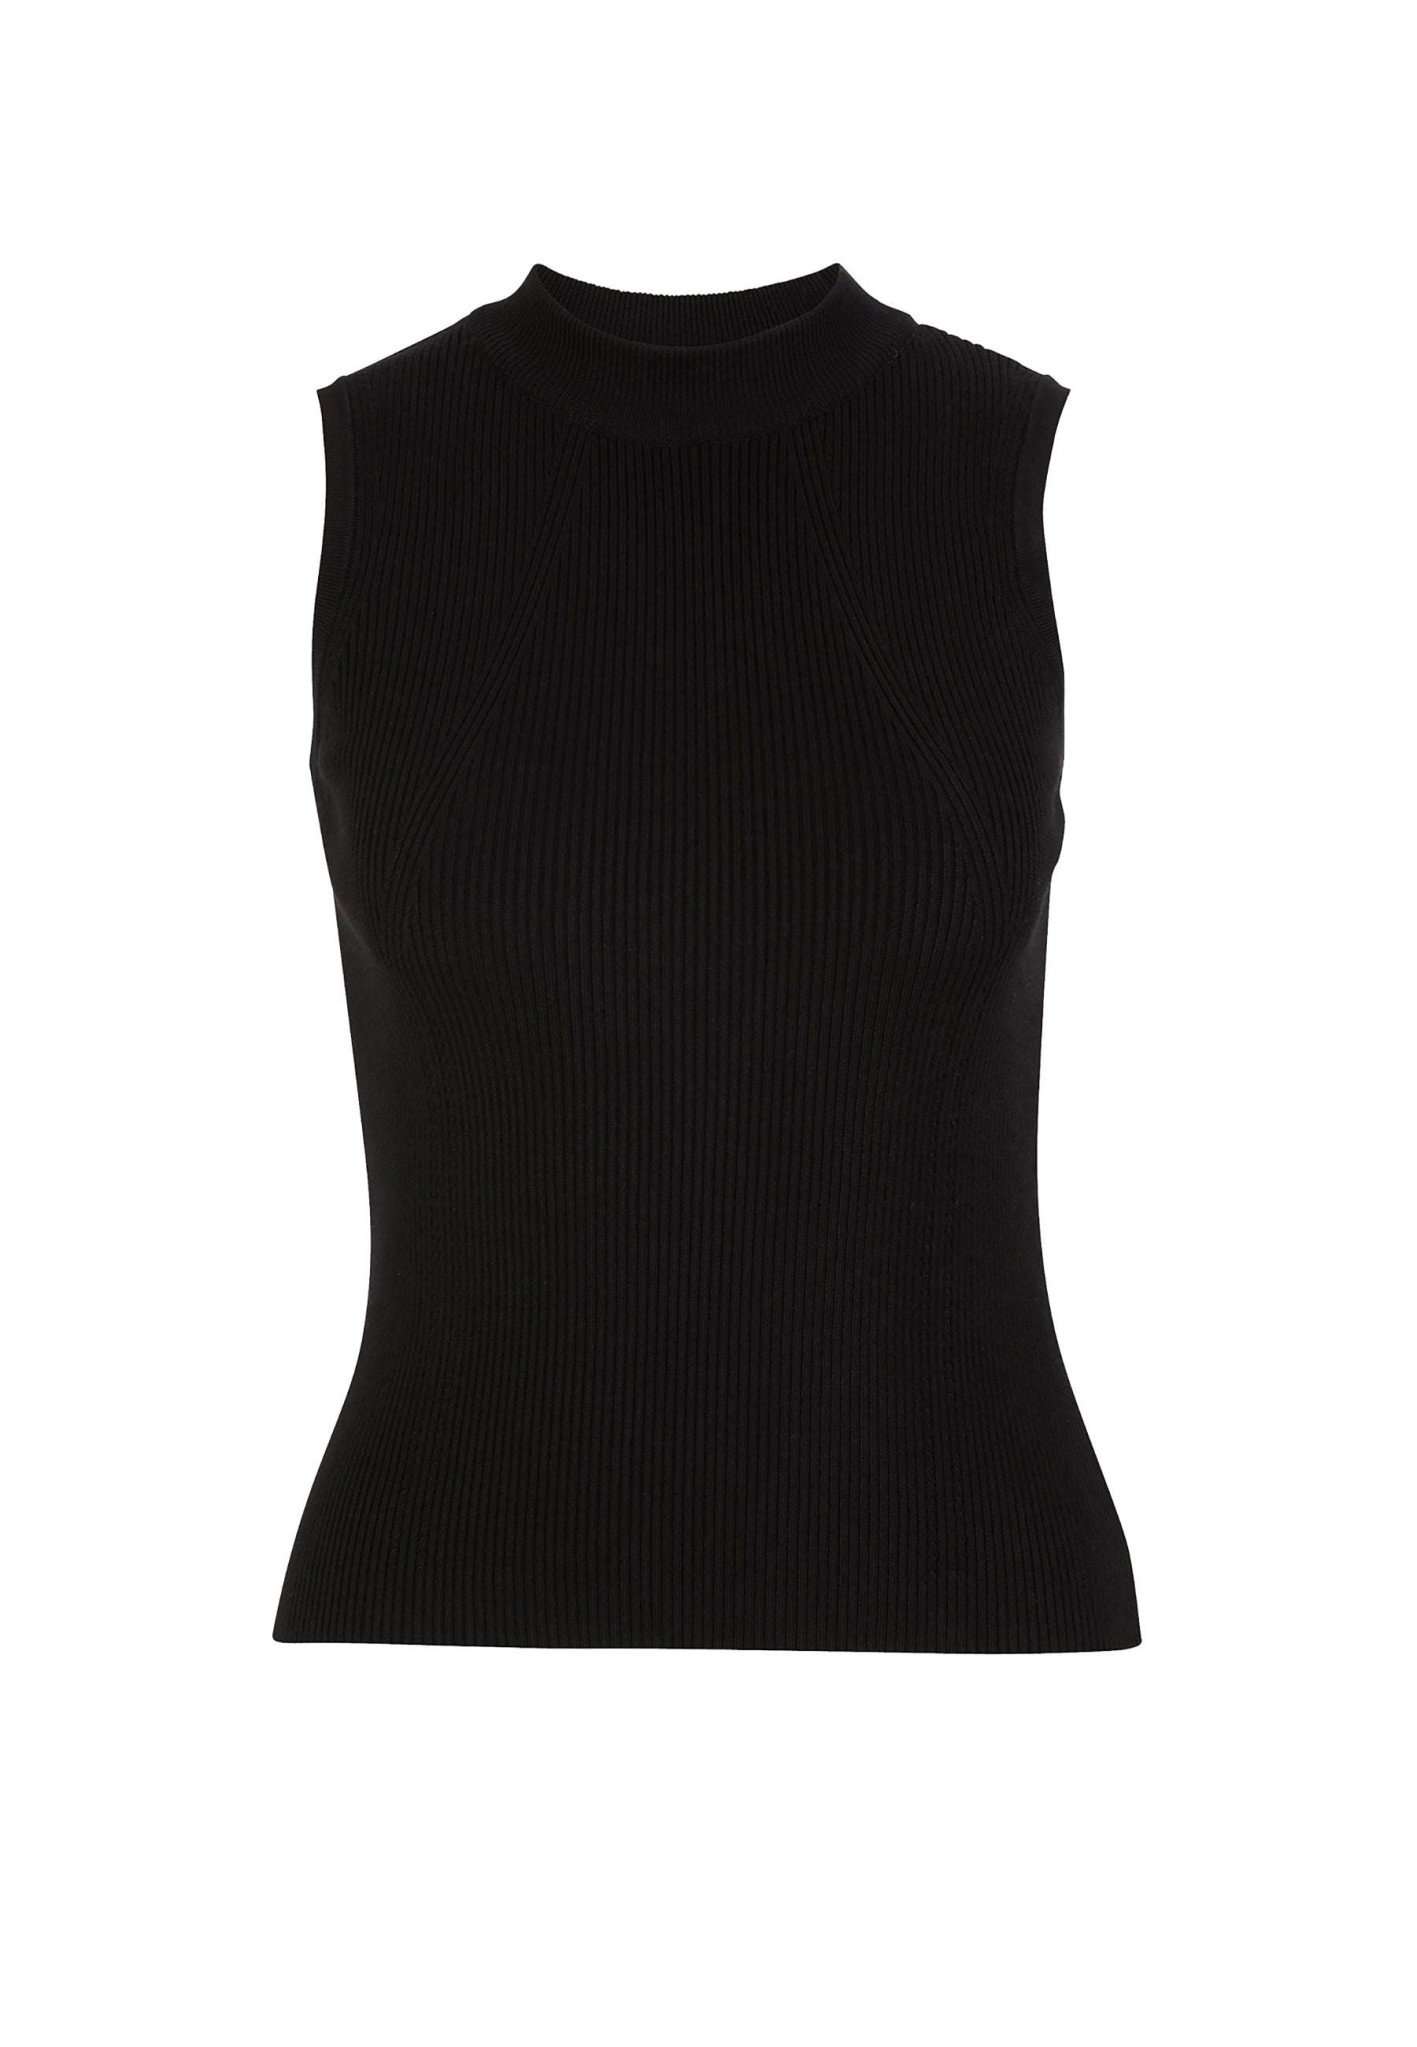 Anand Knitted Standup Collar Top in Black Beauty Tops Tamaris   